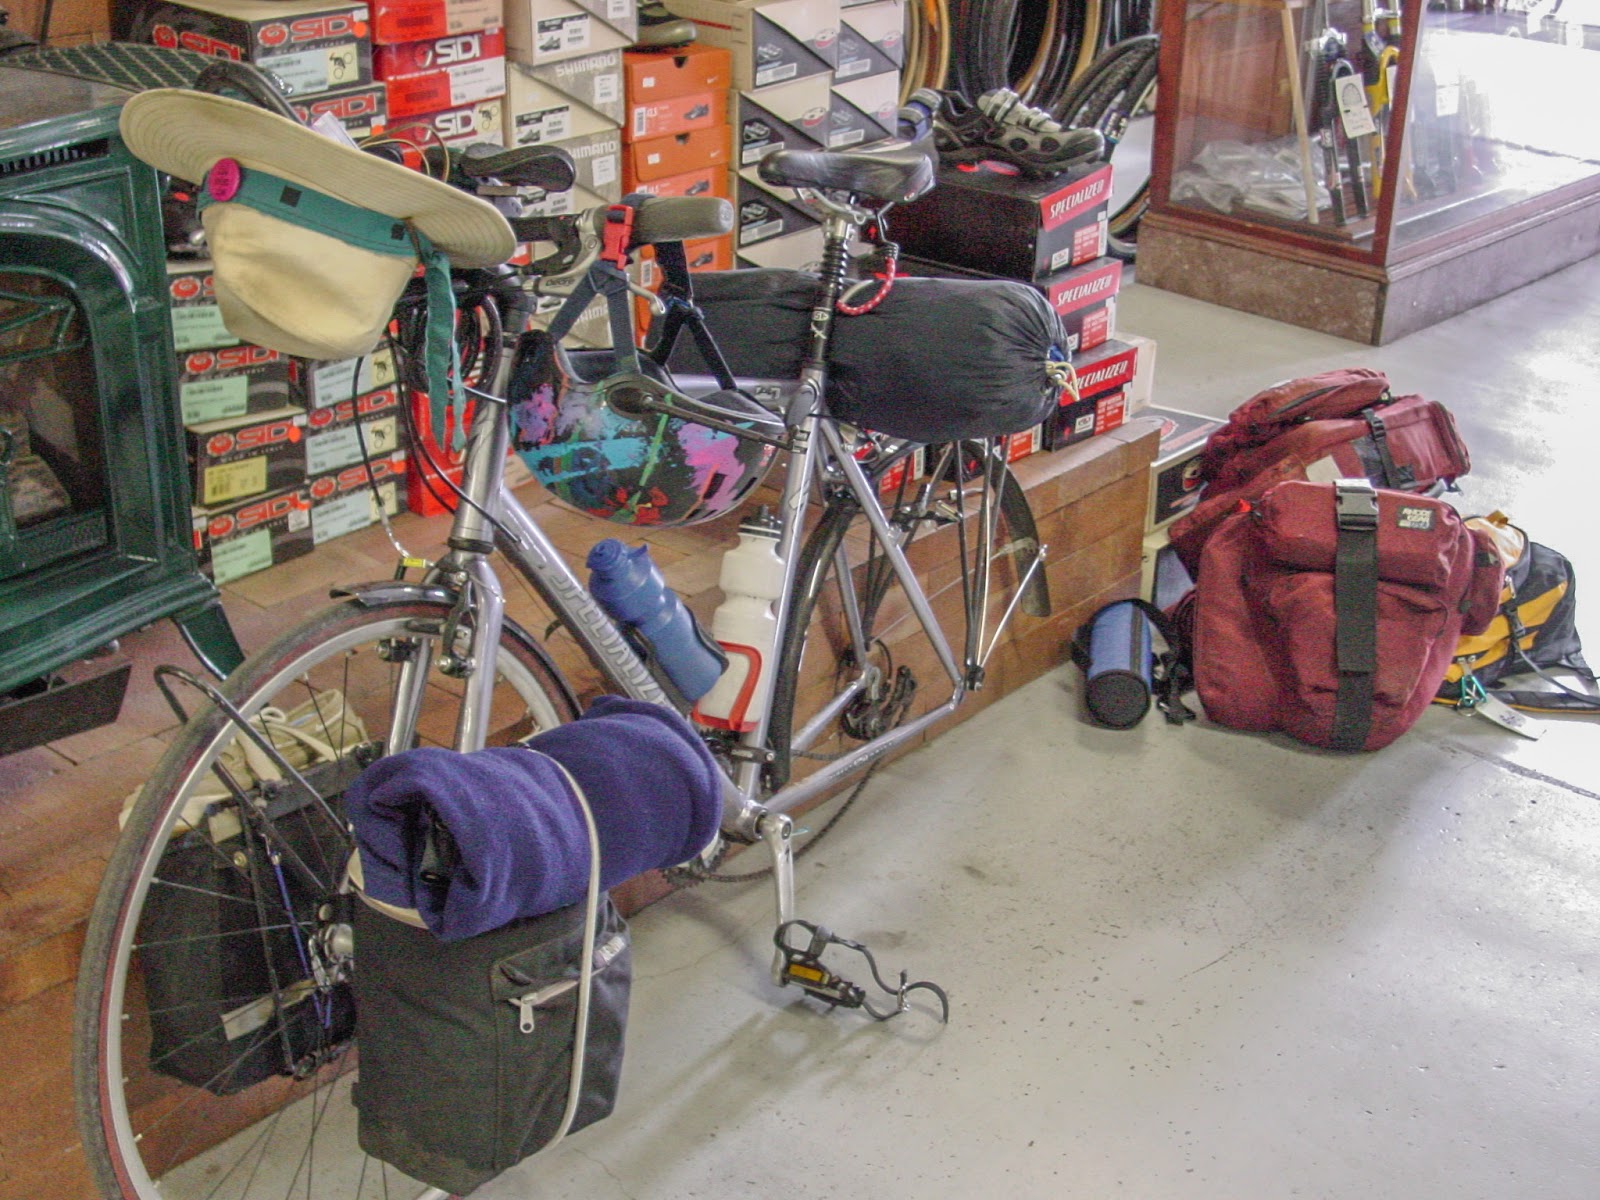 Bicycle with no back wheel and bags on the floor of a shop.